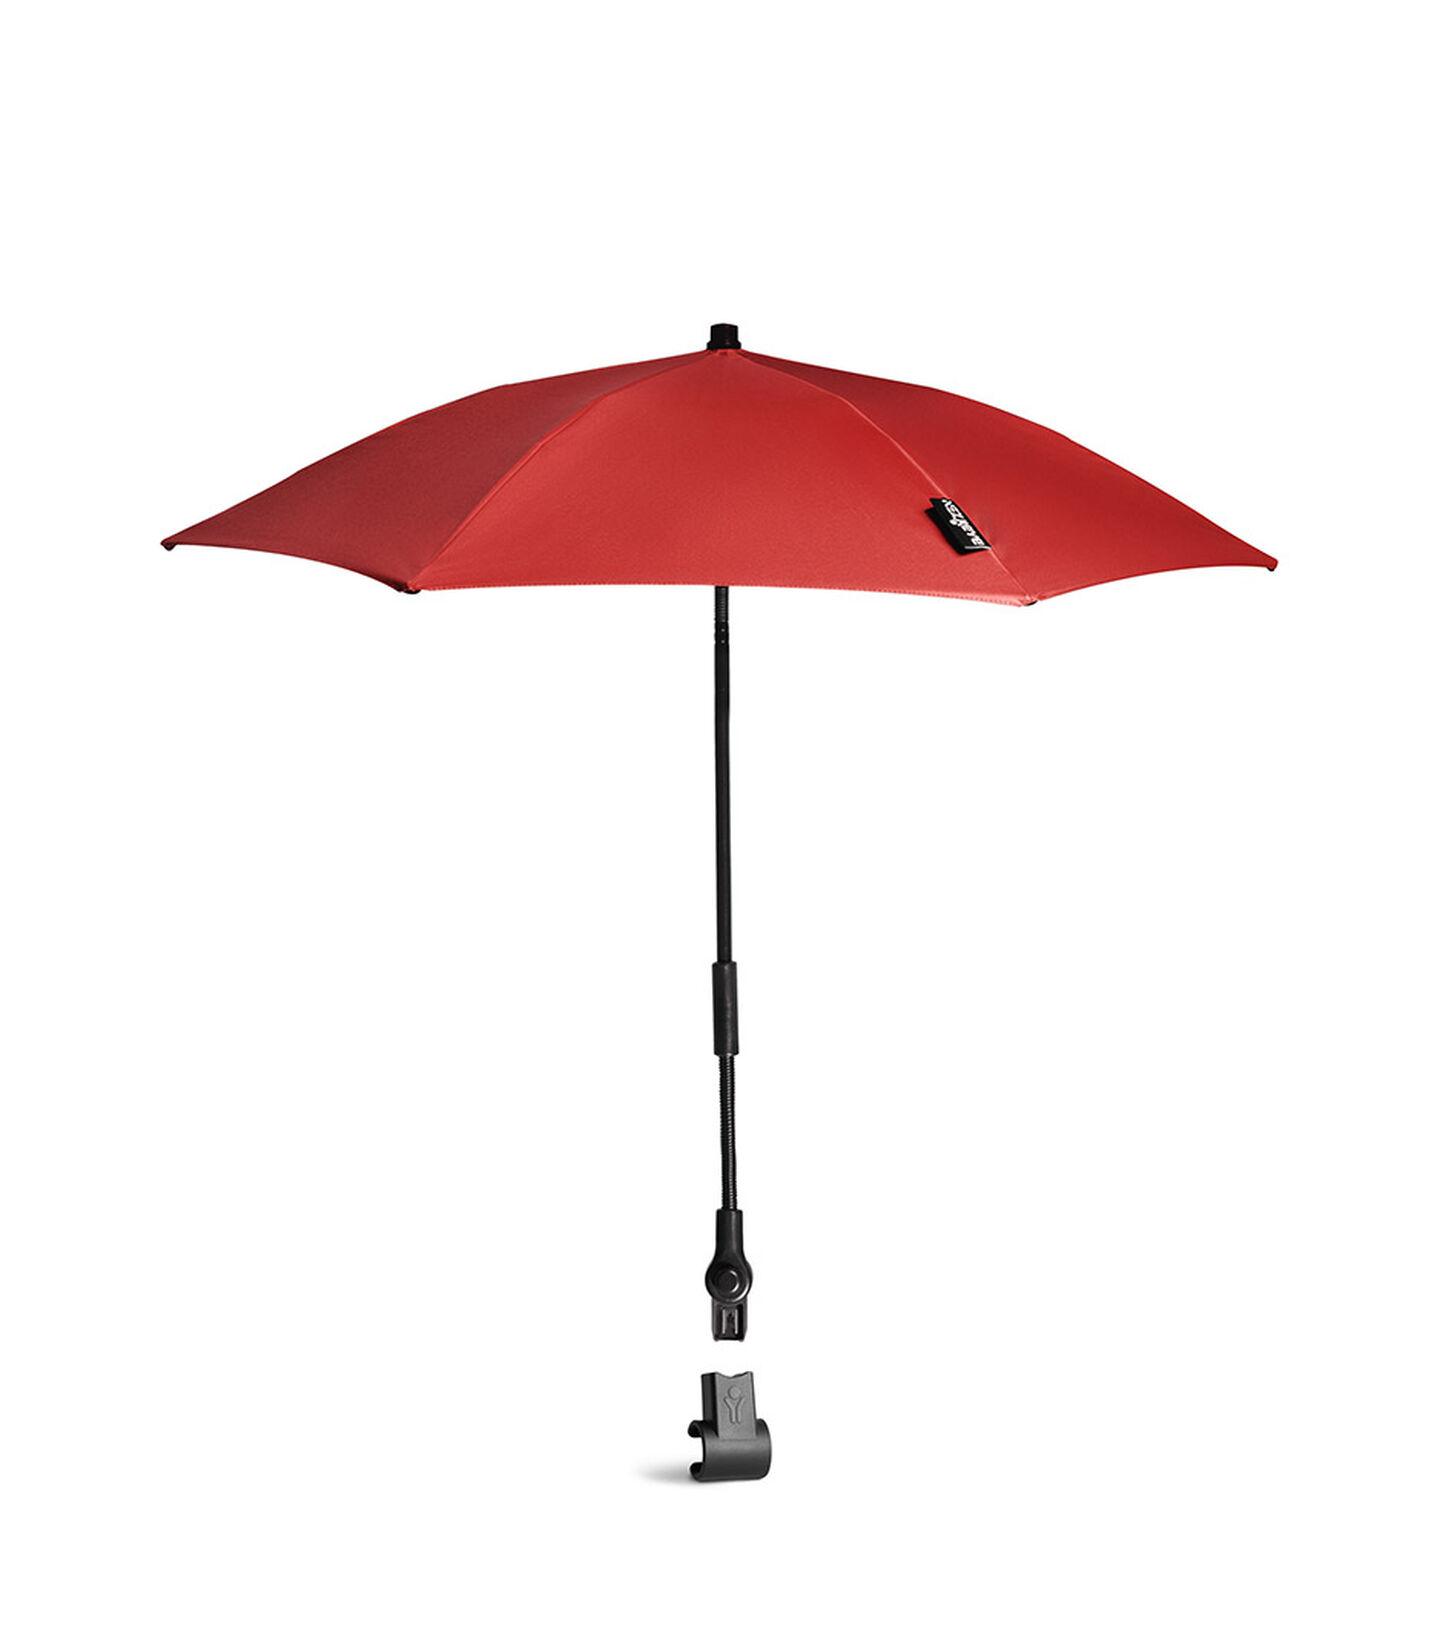 BABYZEN™ YOYO Parasol - Red, Red, mainview view 1